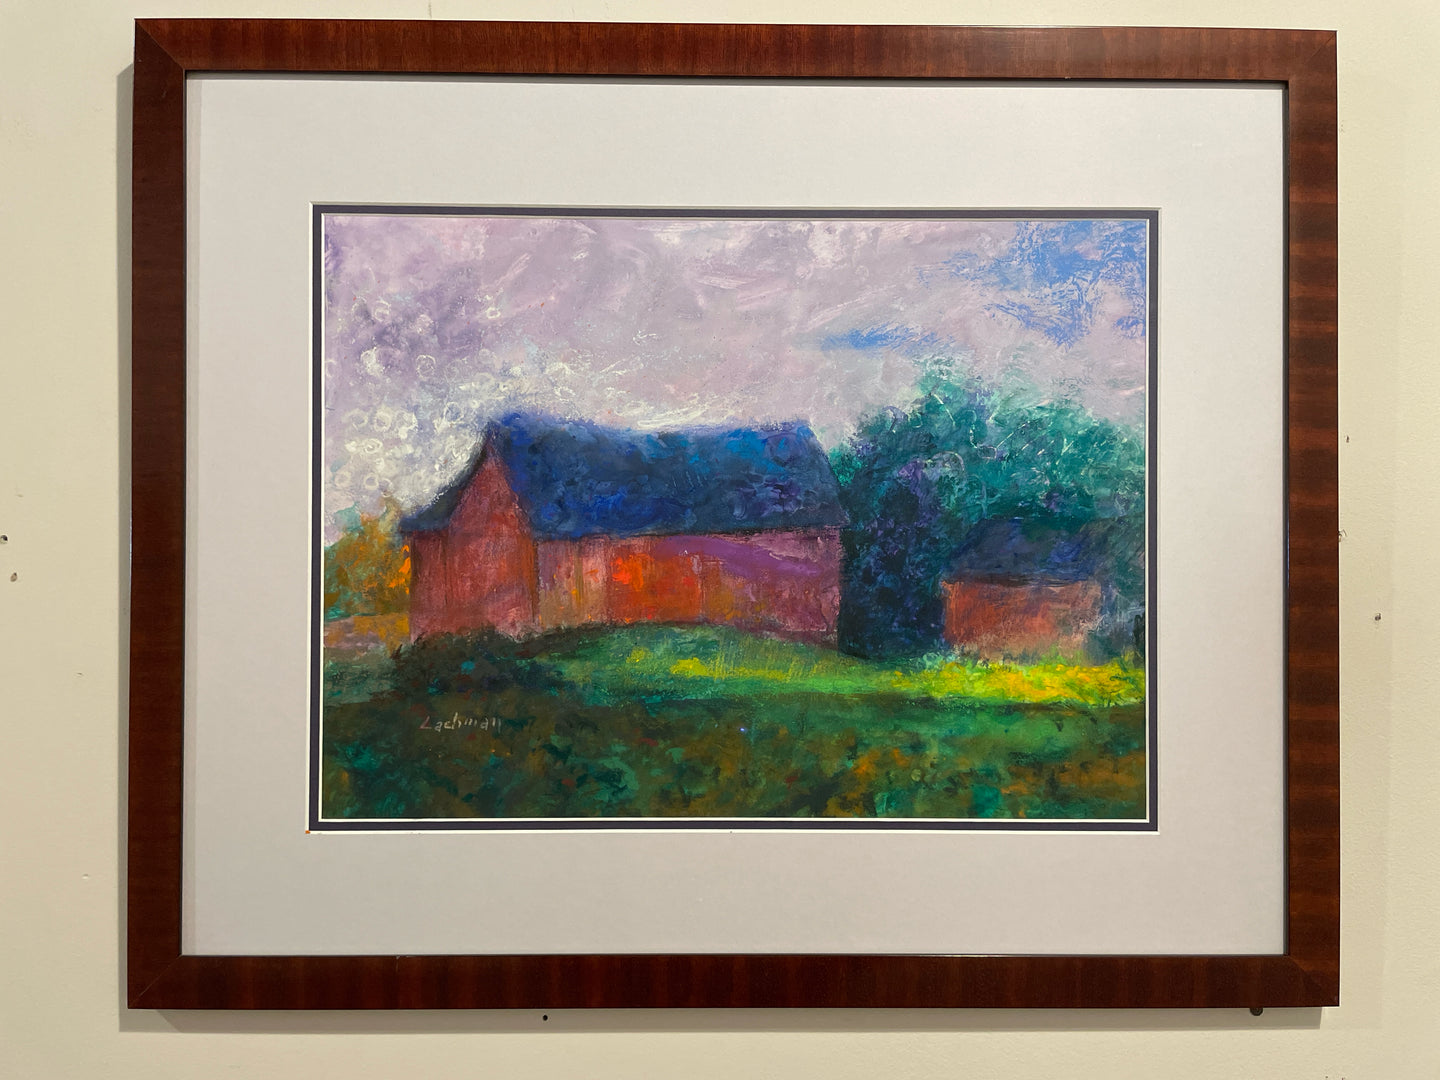 Pastel Colored Barn Print  by Al Lackman,  signed